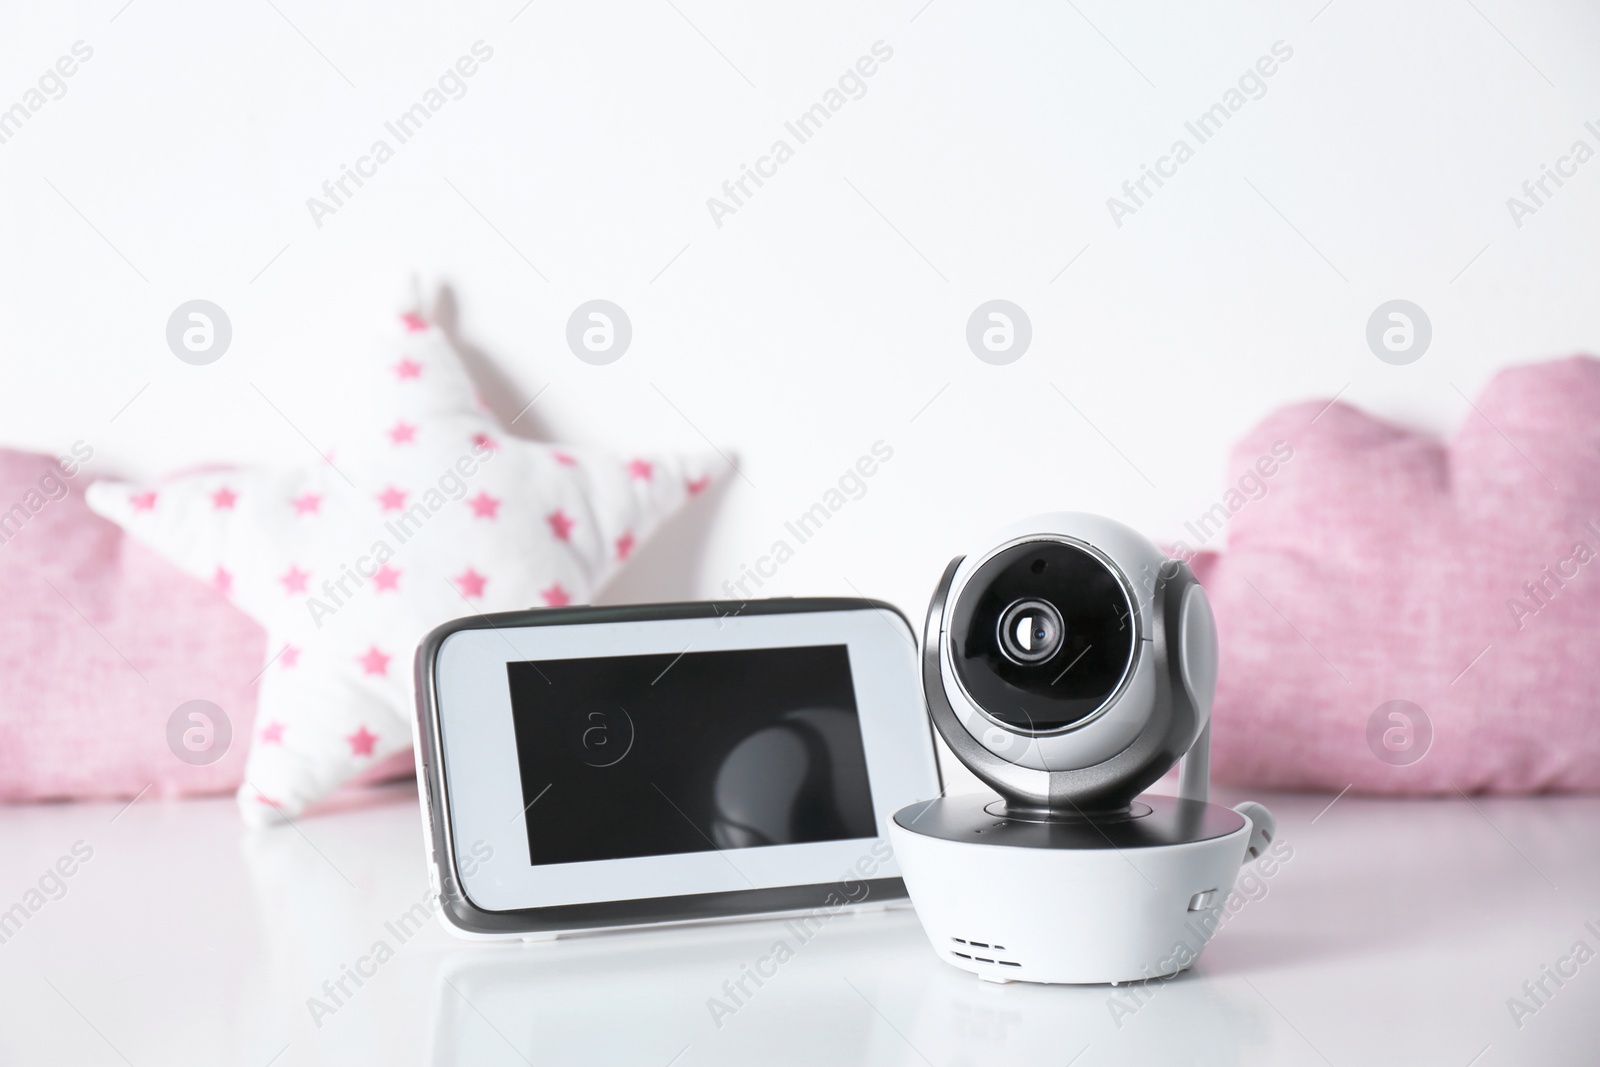 Photo of Modern CCTV security camera, monitor and decorative nursery pillows on table against white background. Space for text